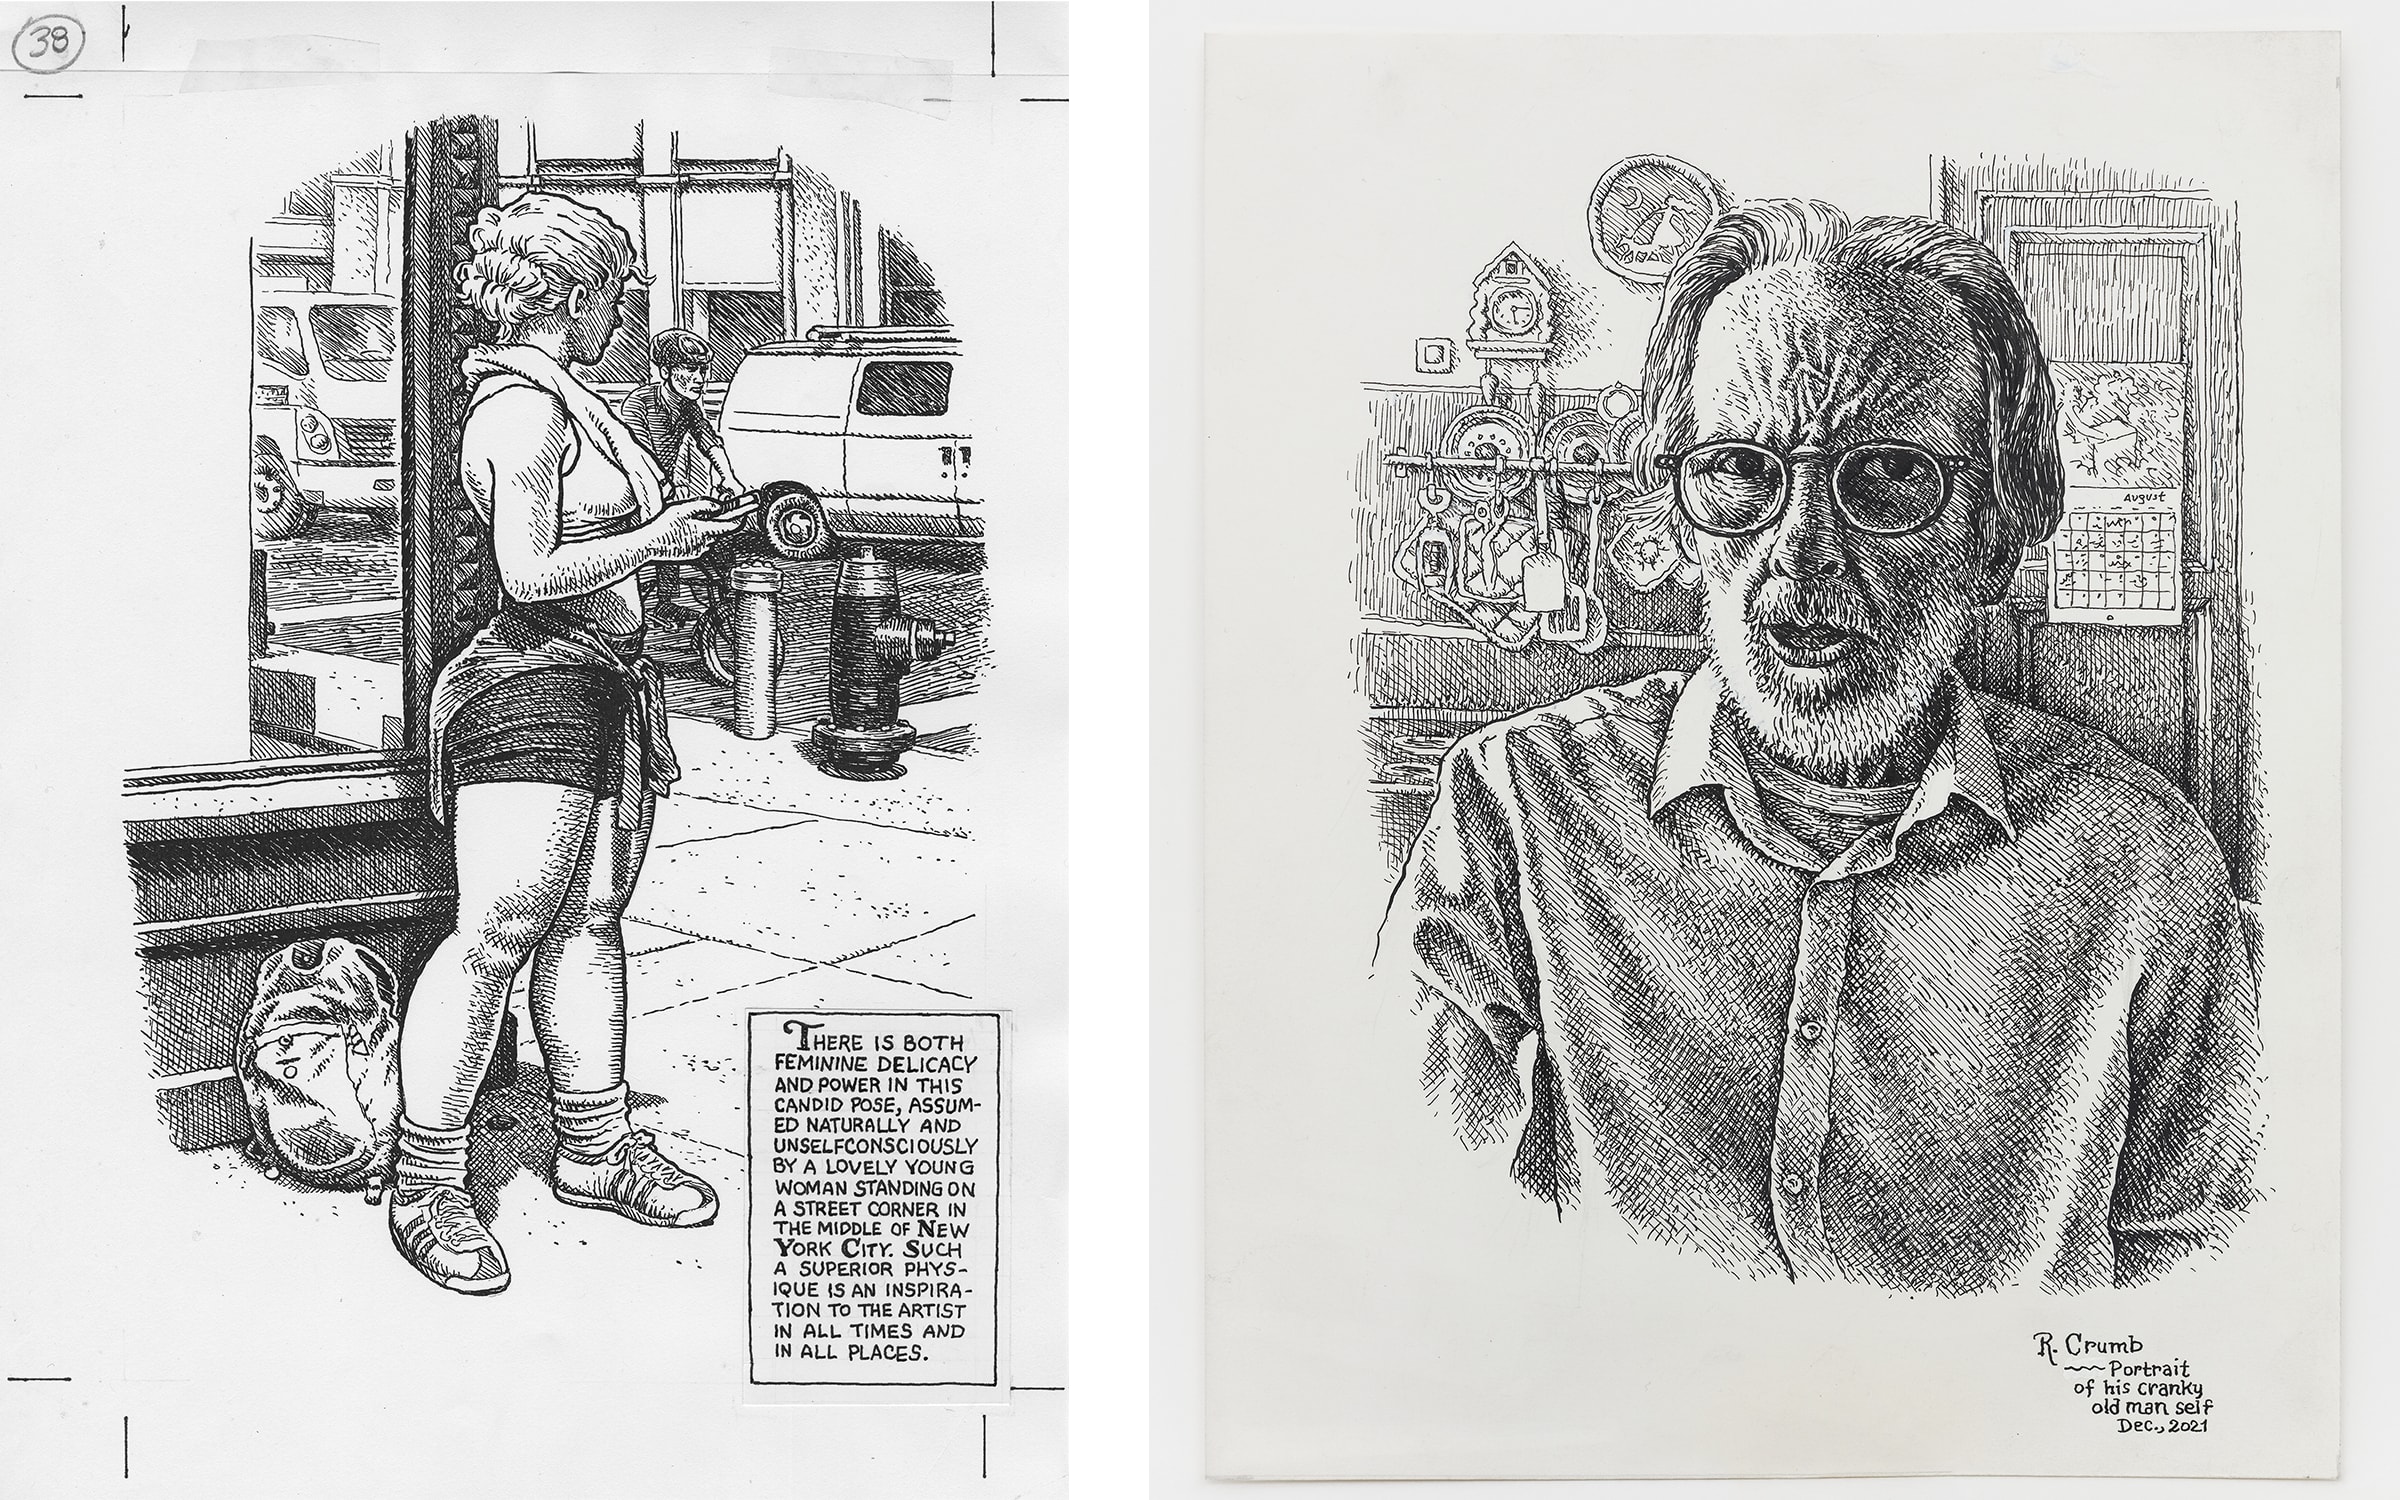 Works by Robert Crumb. Left: Untitled, 2014. Page from “Art & Beauty Magazine, Number 3,” 2016. © Robert Crumb, 2014. Right: Portrait of His Cranky Old Man Self, 2021. © Robert Crumb, 2021. Courtesy the artist, Paul Morris, and David Zwirner.